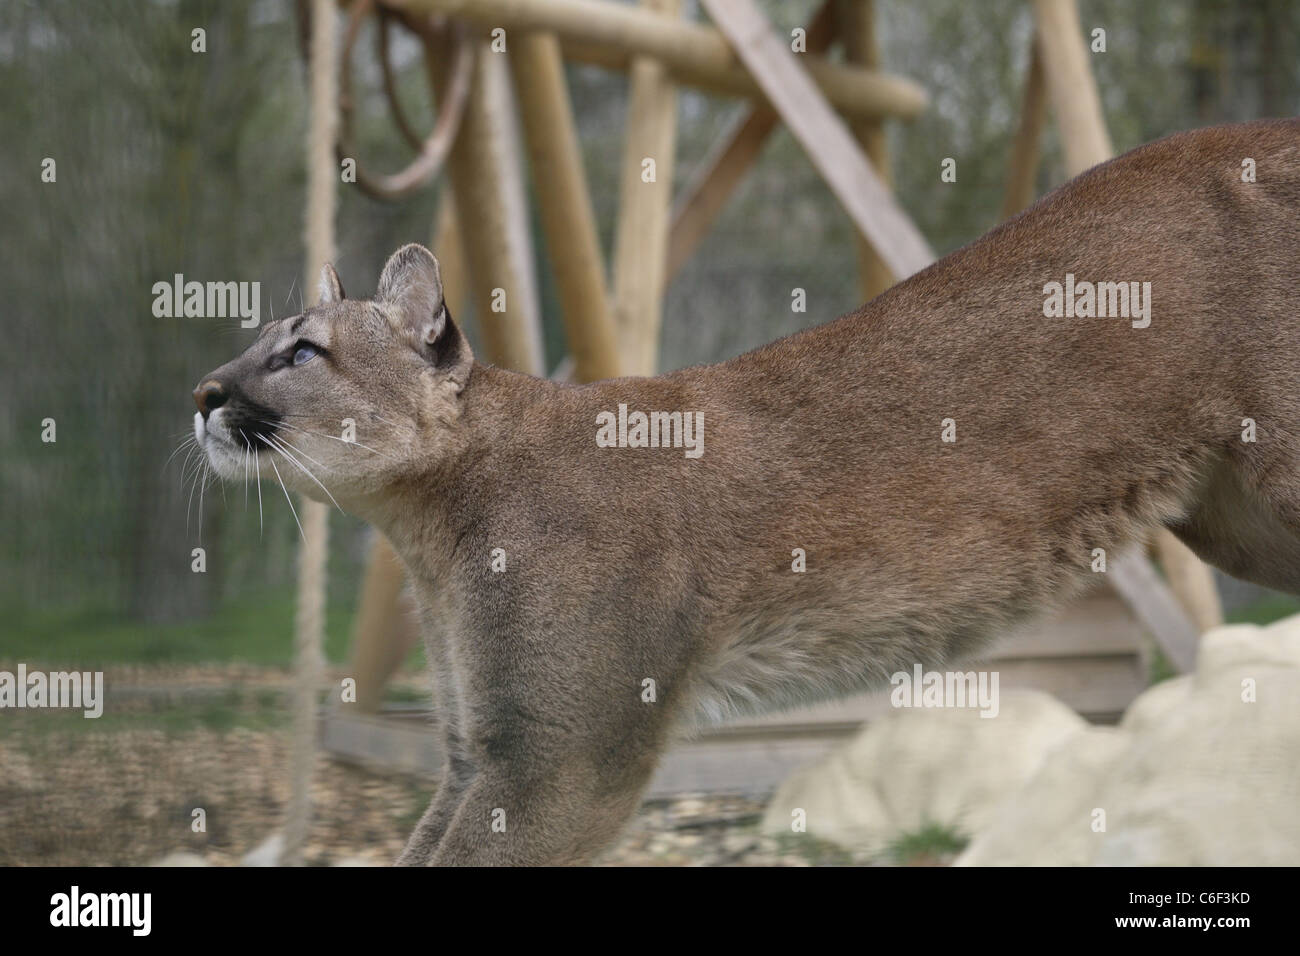 A puma leaping and catching food Stock Photo